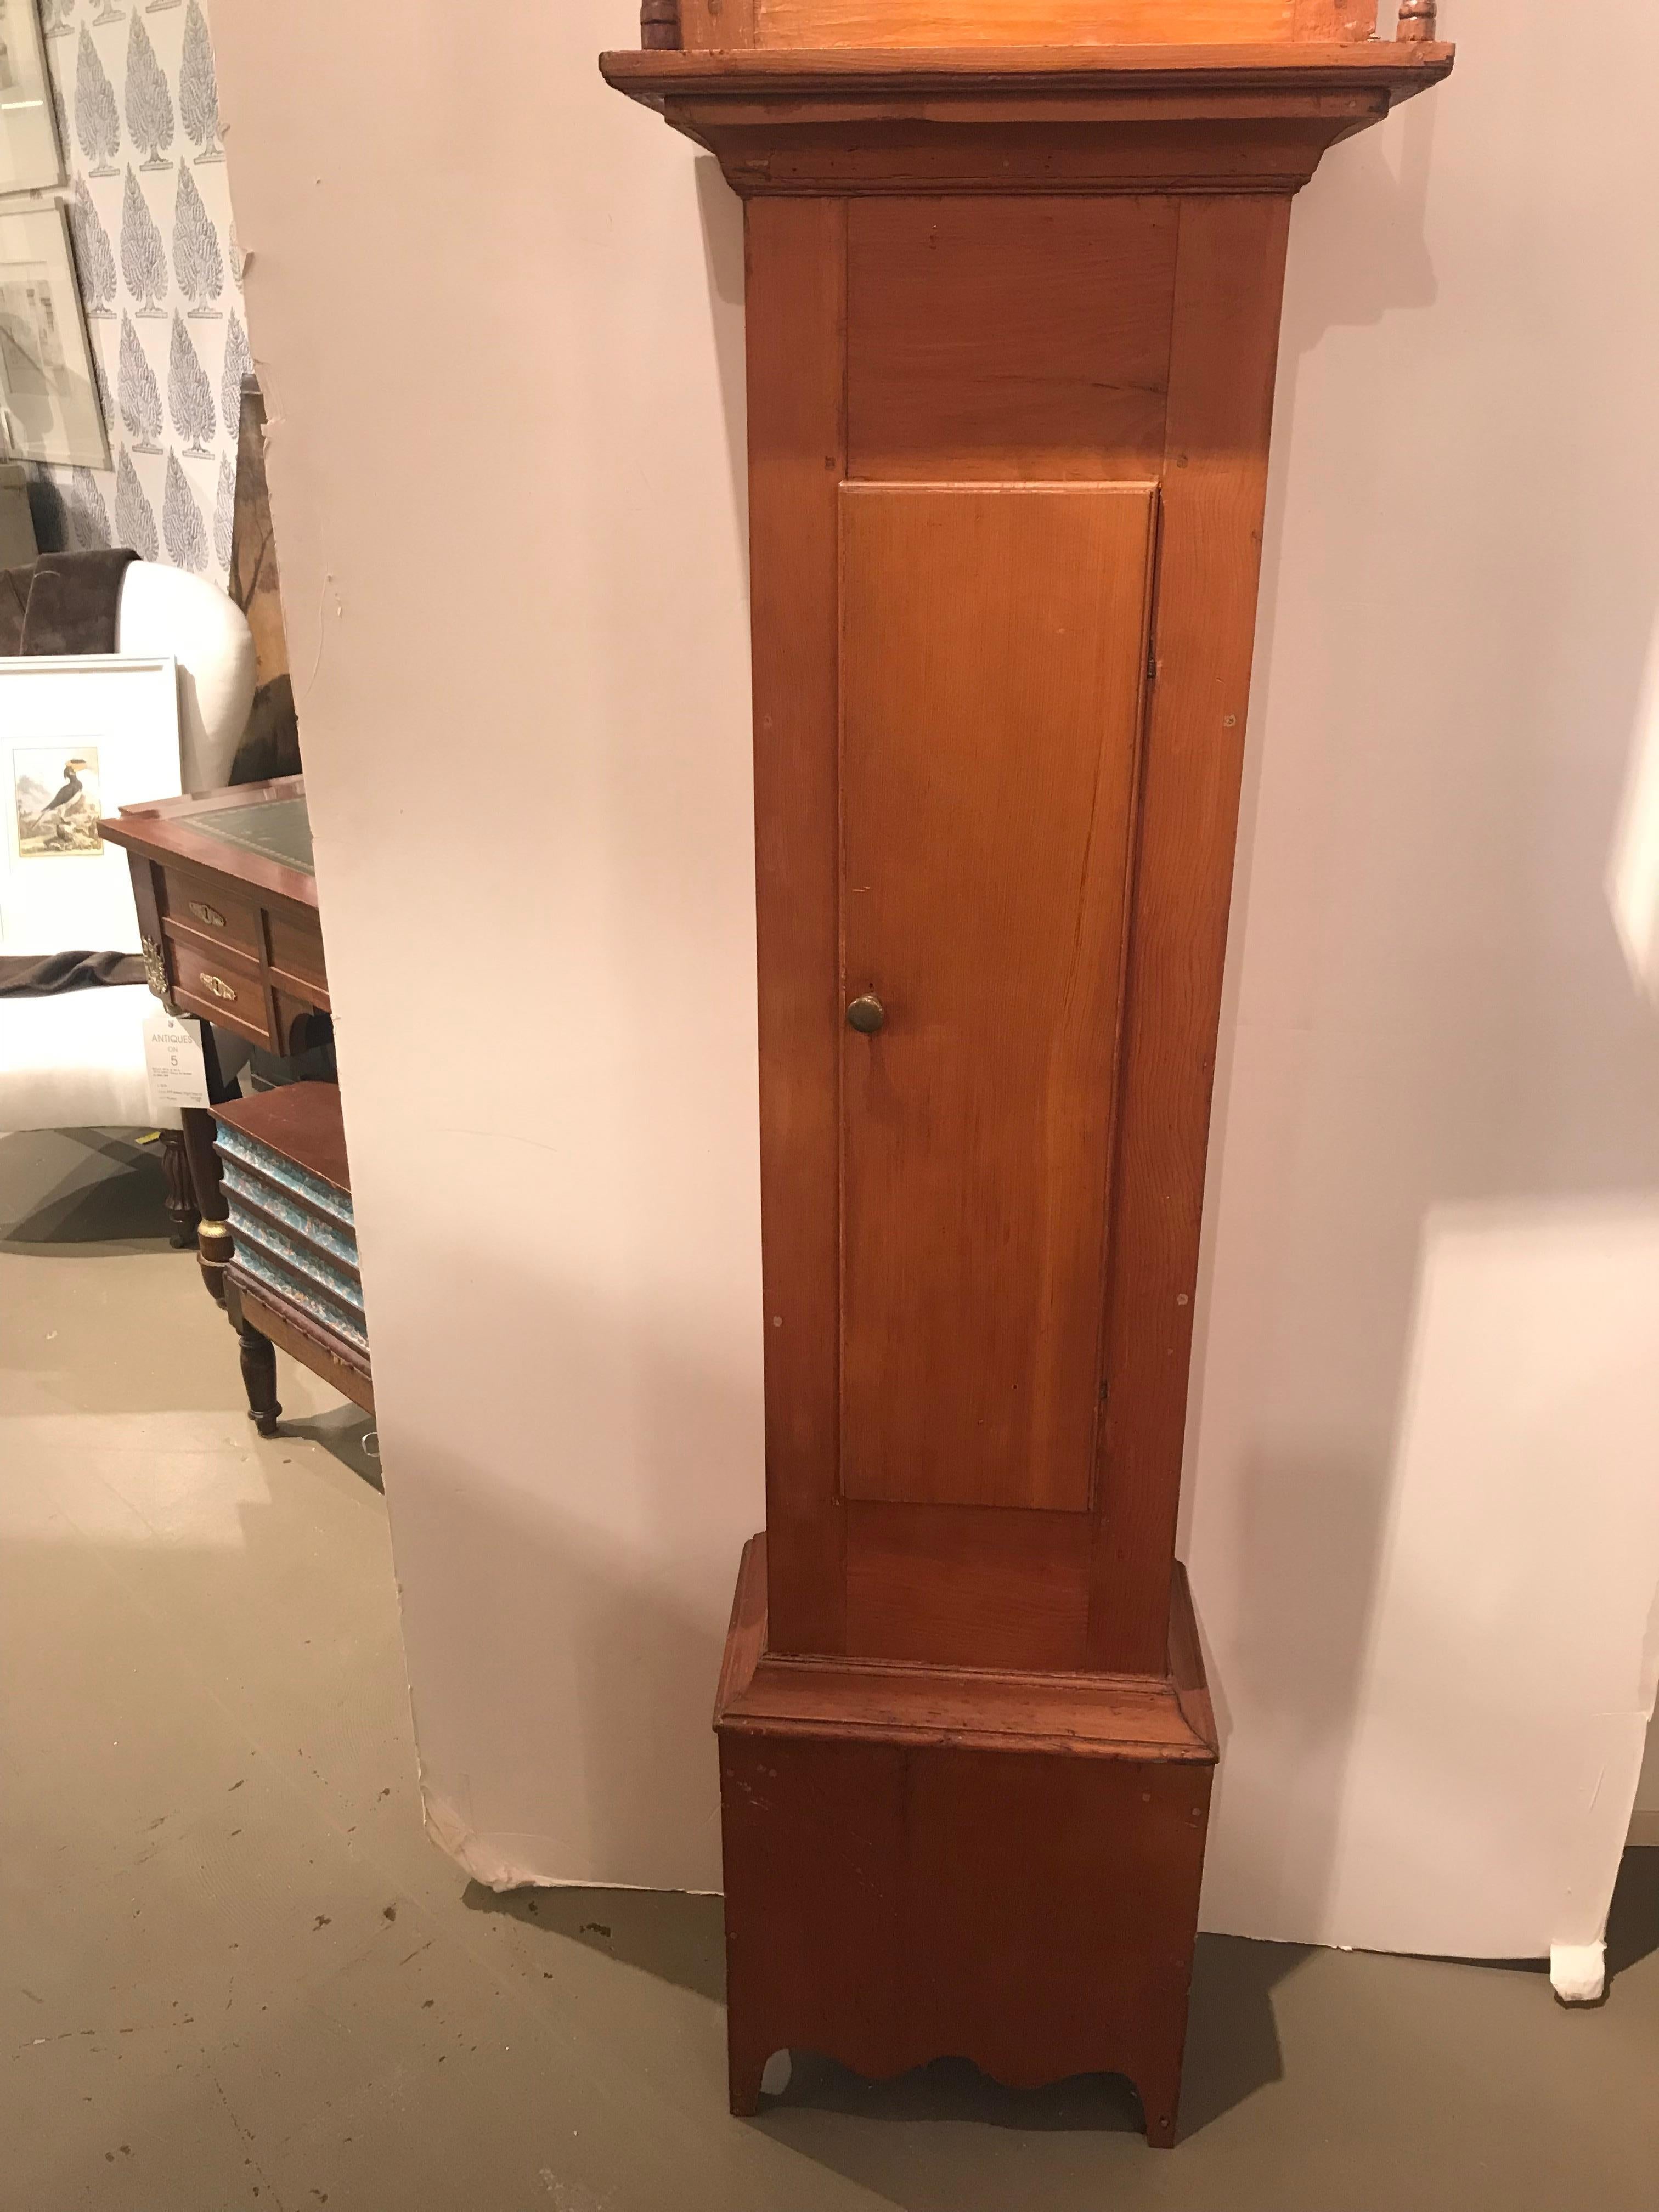 r whiting winchester grandfather clock